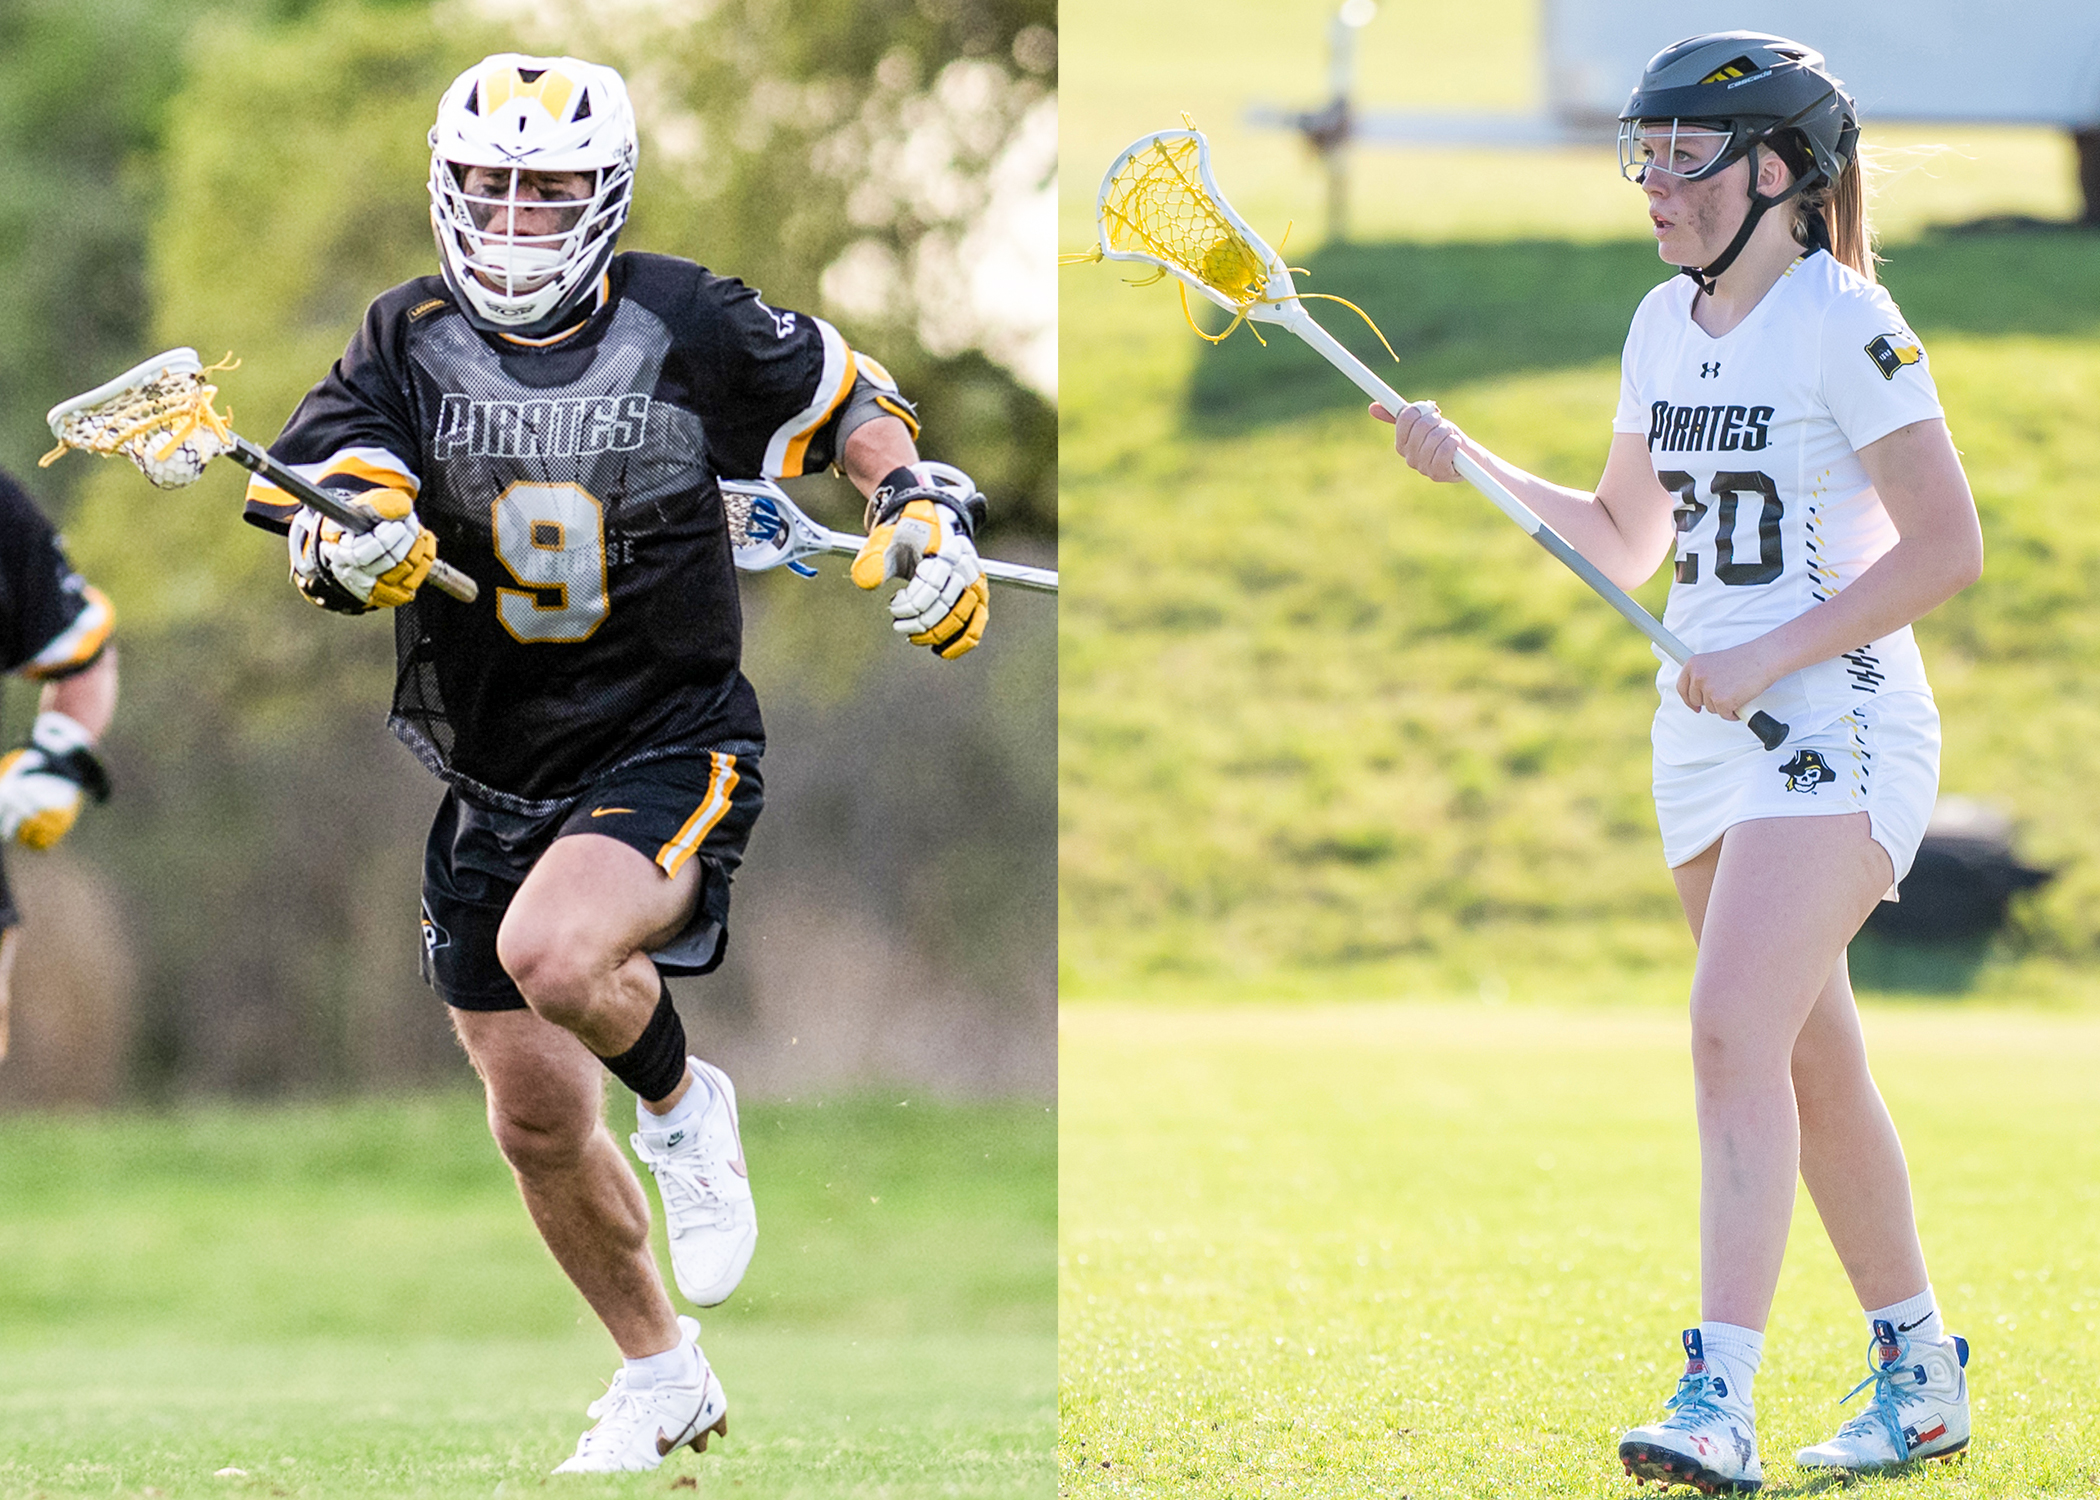 Men's and Women's Lacrosse Combine for Five Academic All-District Awards